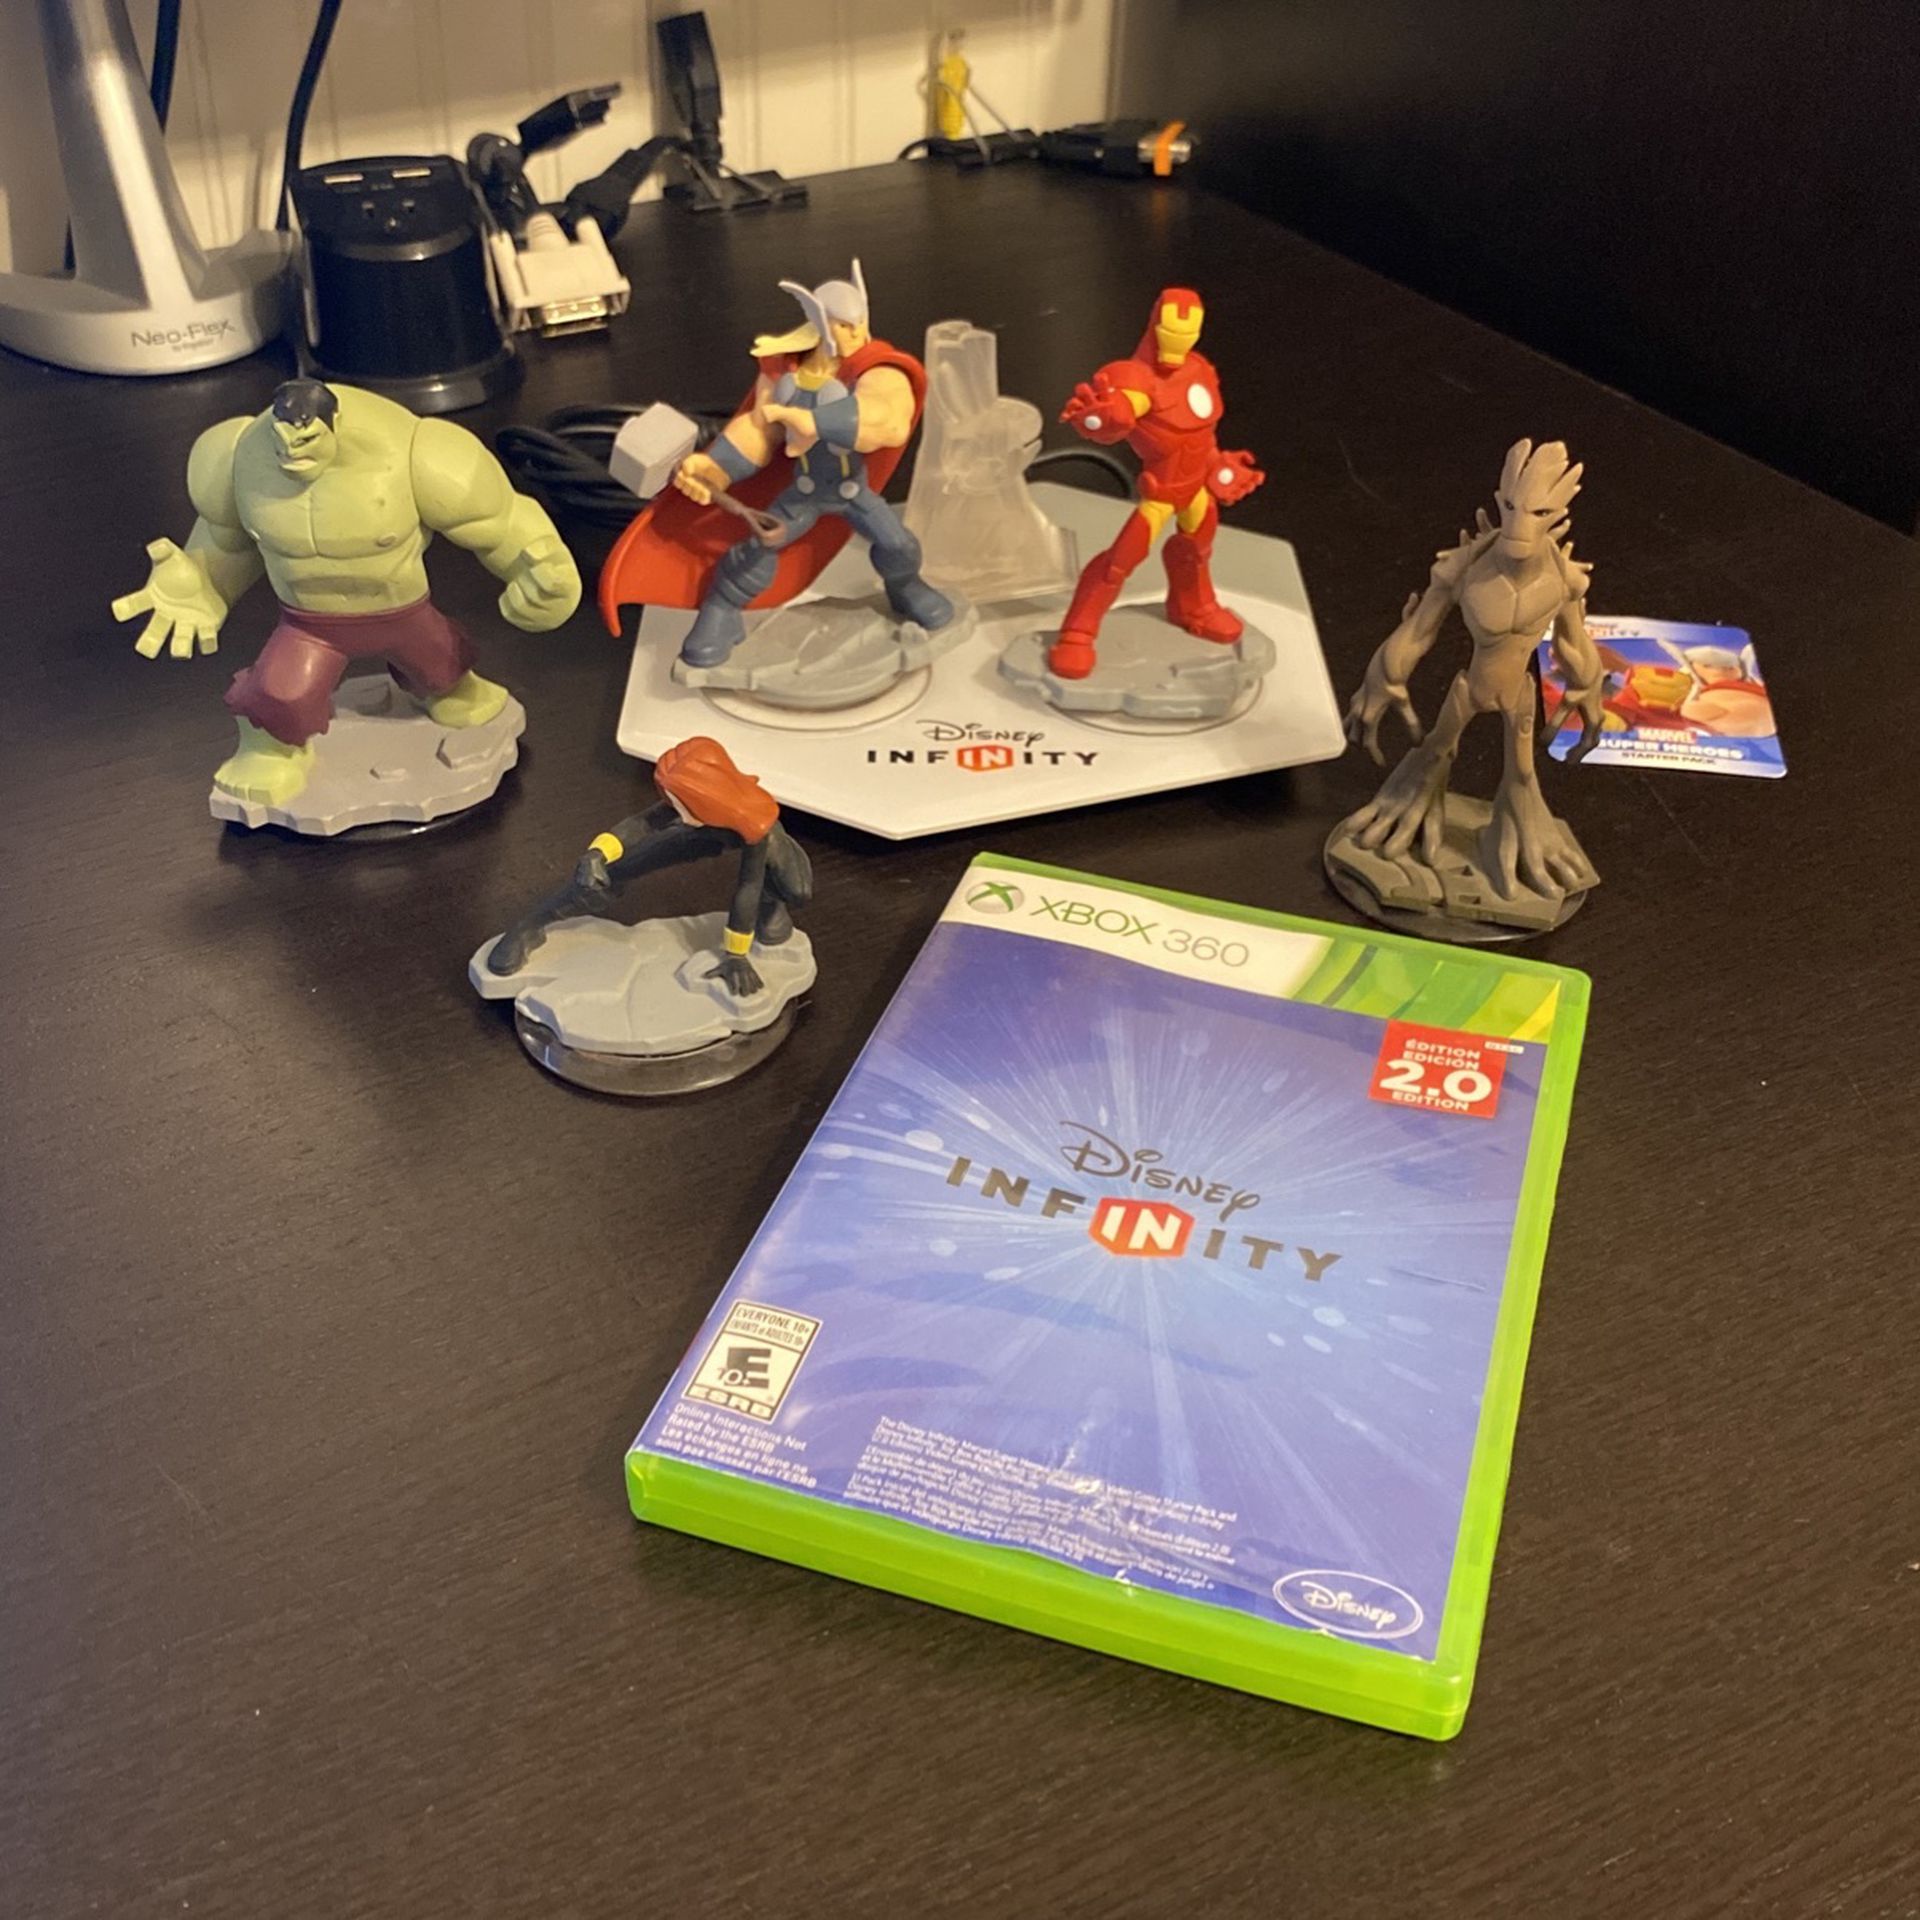 Disney Infinity Game, Figurines And Portal Base Pad For Xbox 360